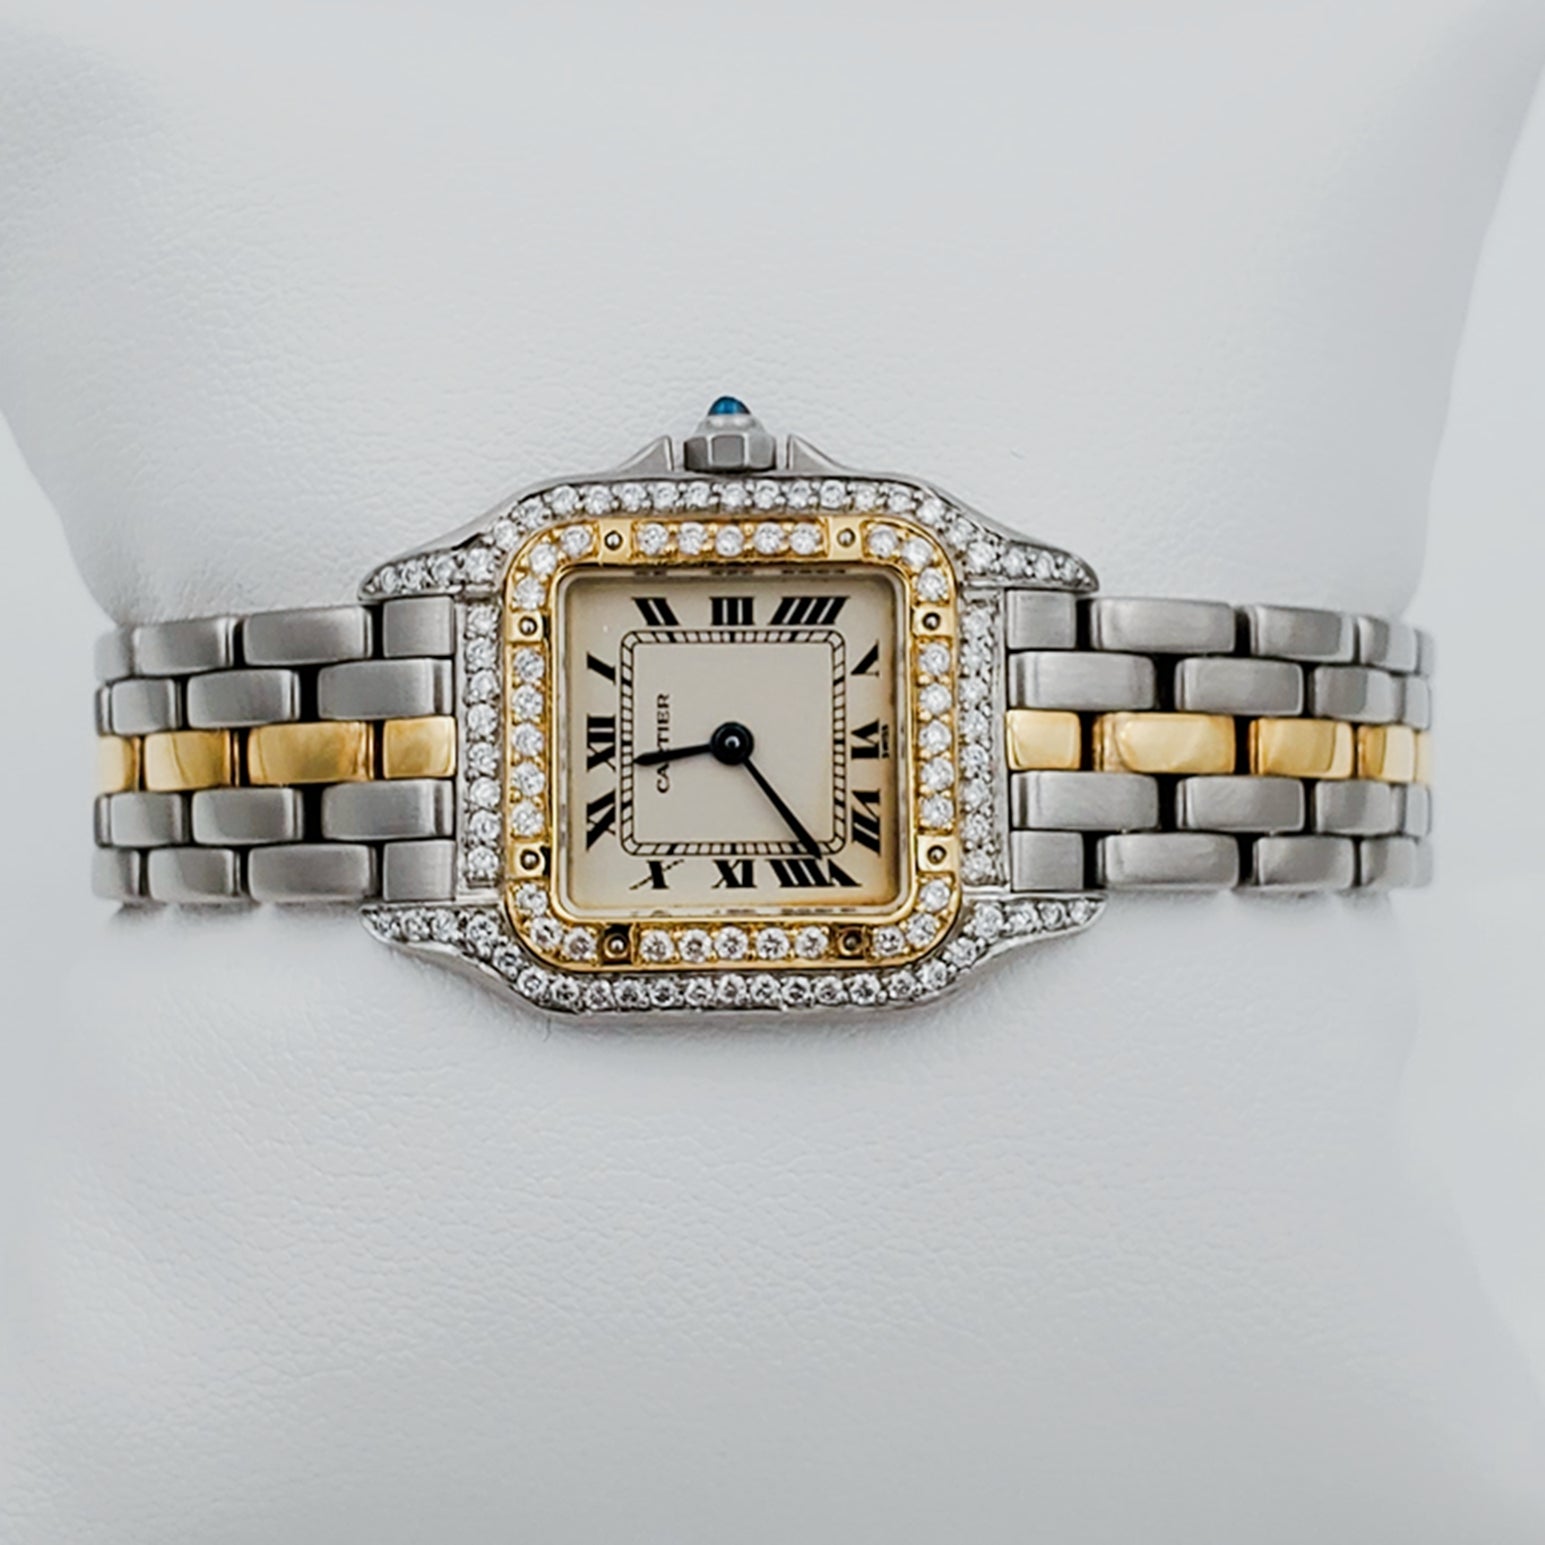 Ladies Small Cartier Panthere 22mm x 30mm Watch in 18K Yellow Gold / Stainless Steel with Diamond Bezel and White Dial. (Pre-Owned)